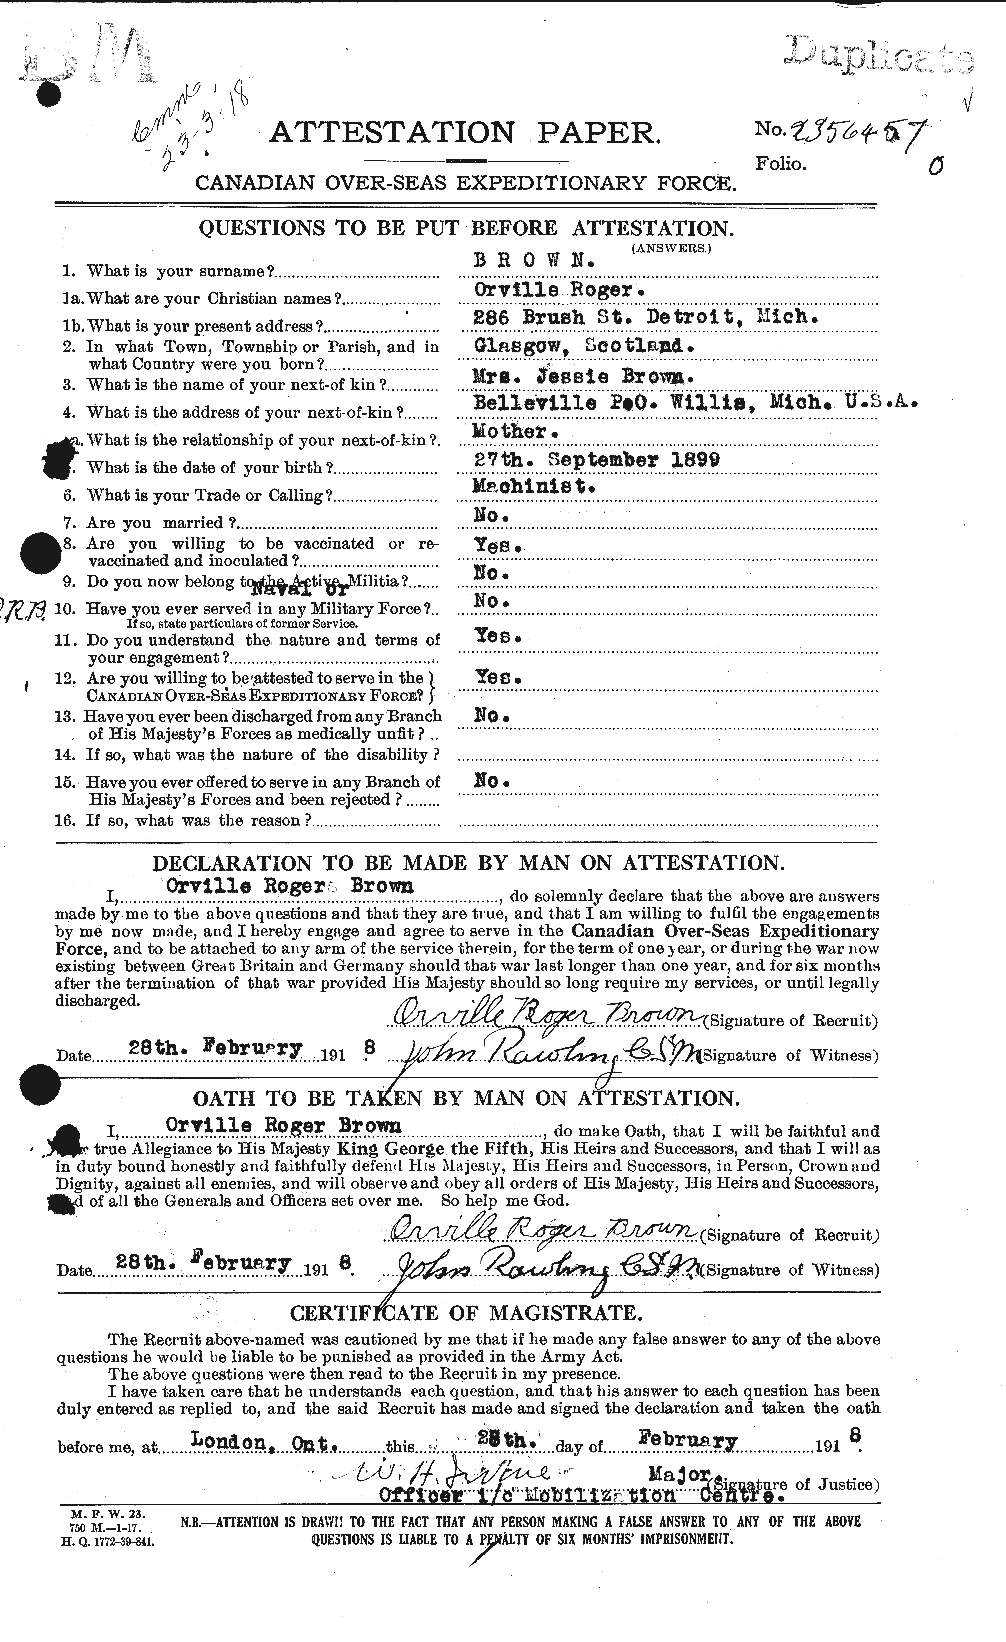 Personnel Records of the First World War - CEF 267133a